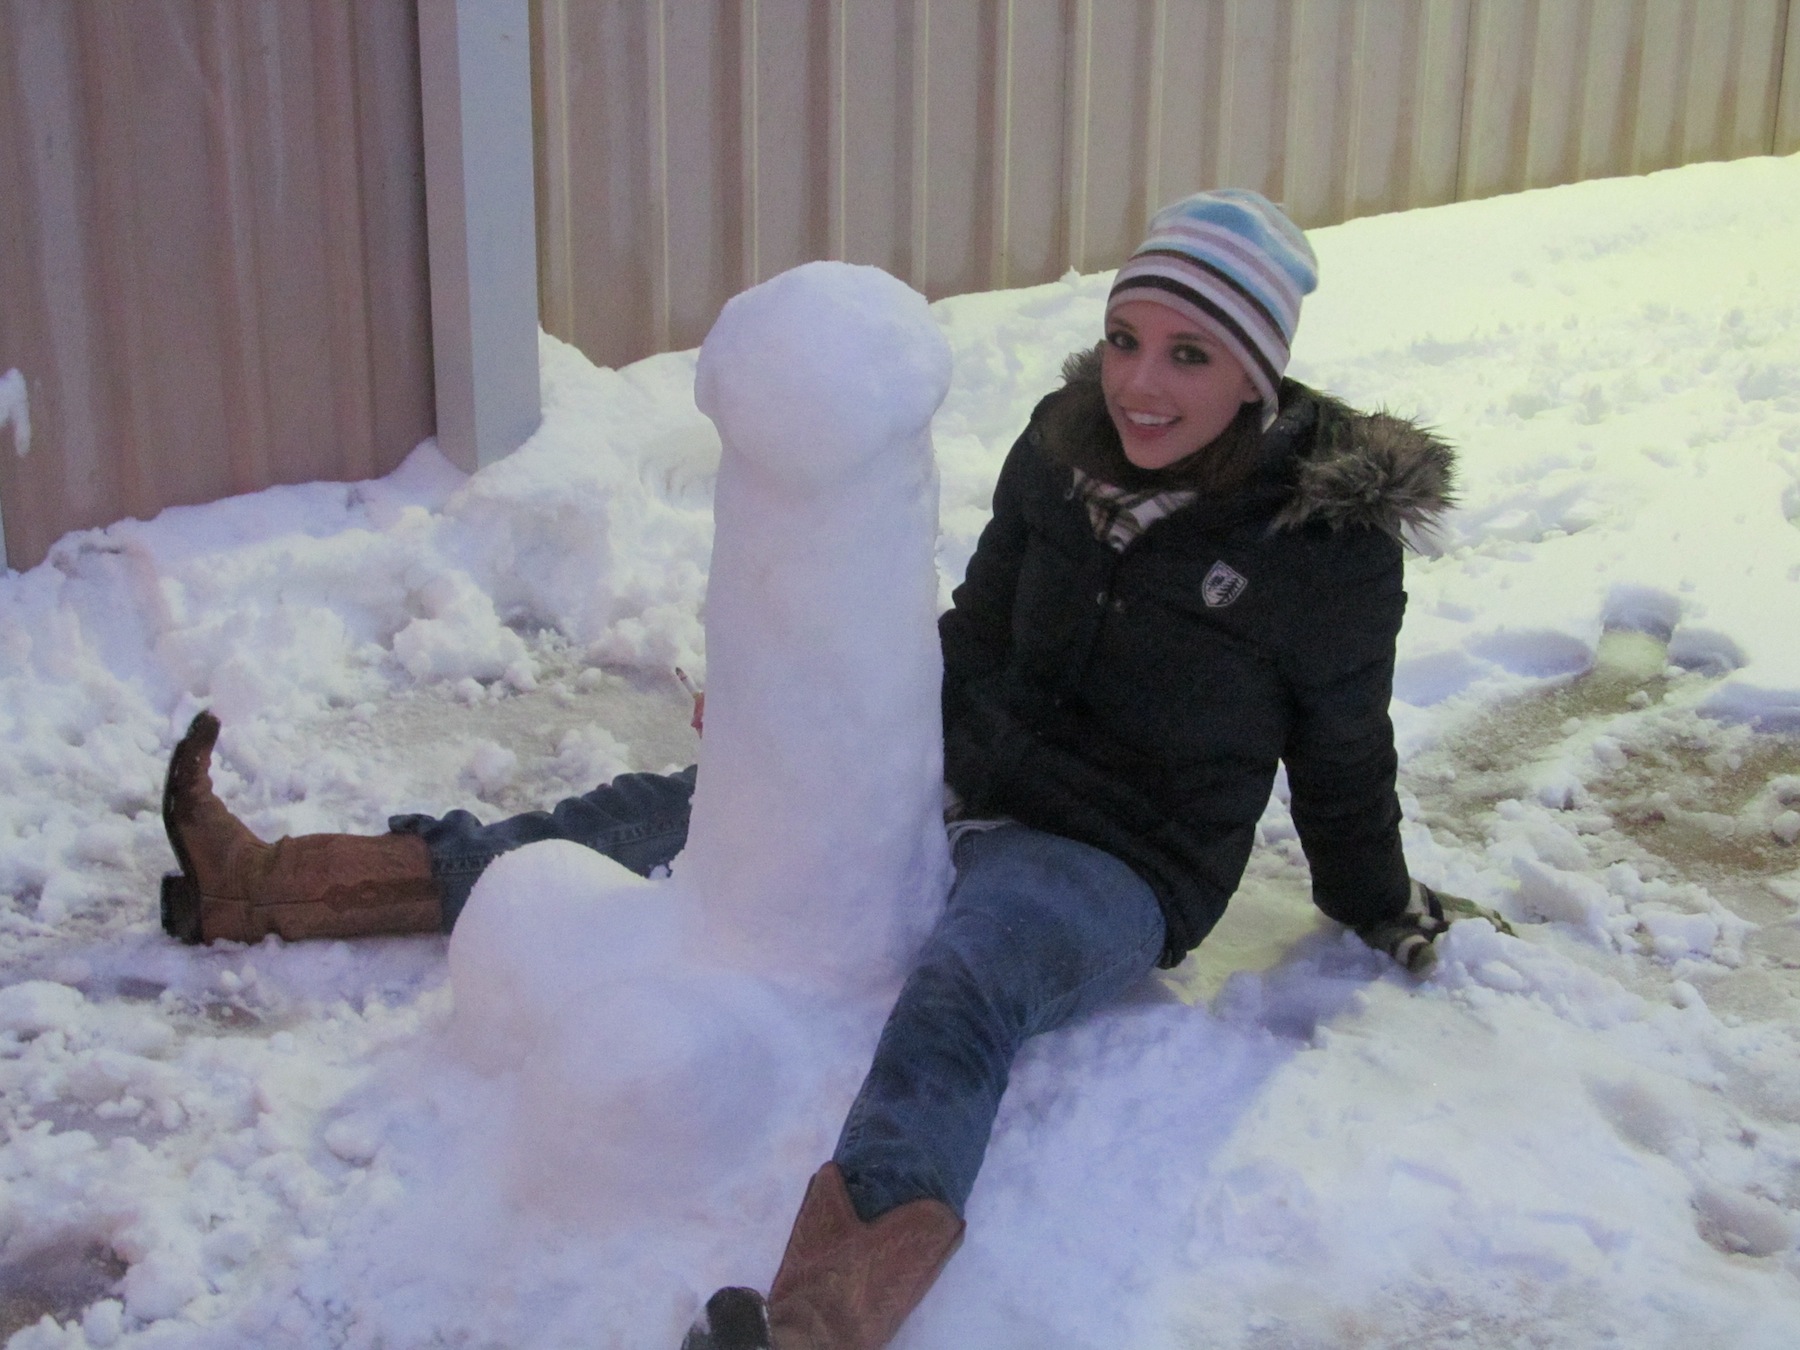 Bored with more traditional snow sculpture, my roommate and I decided to sculpt this snow penis. Here is me posing with our inappropriate art. We built it in the BACKyard. 